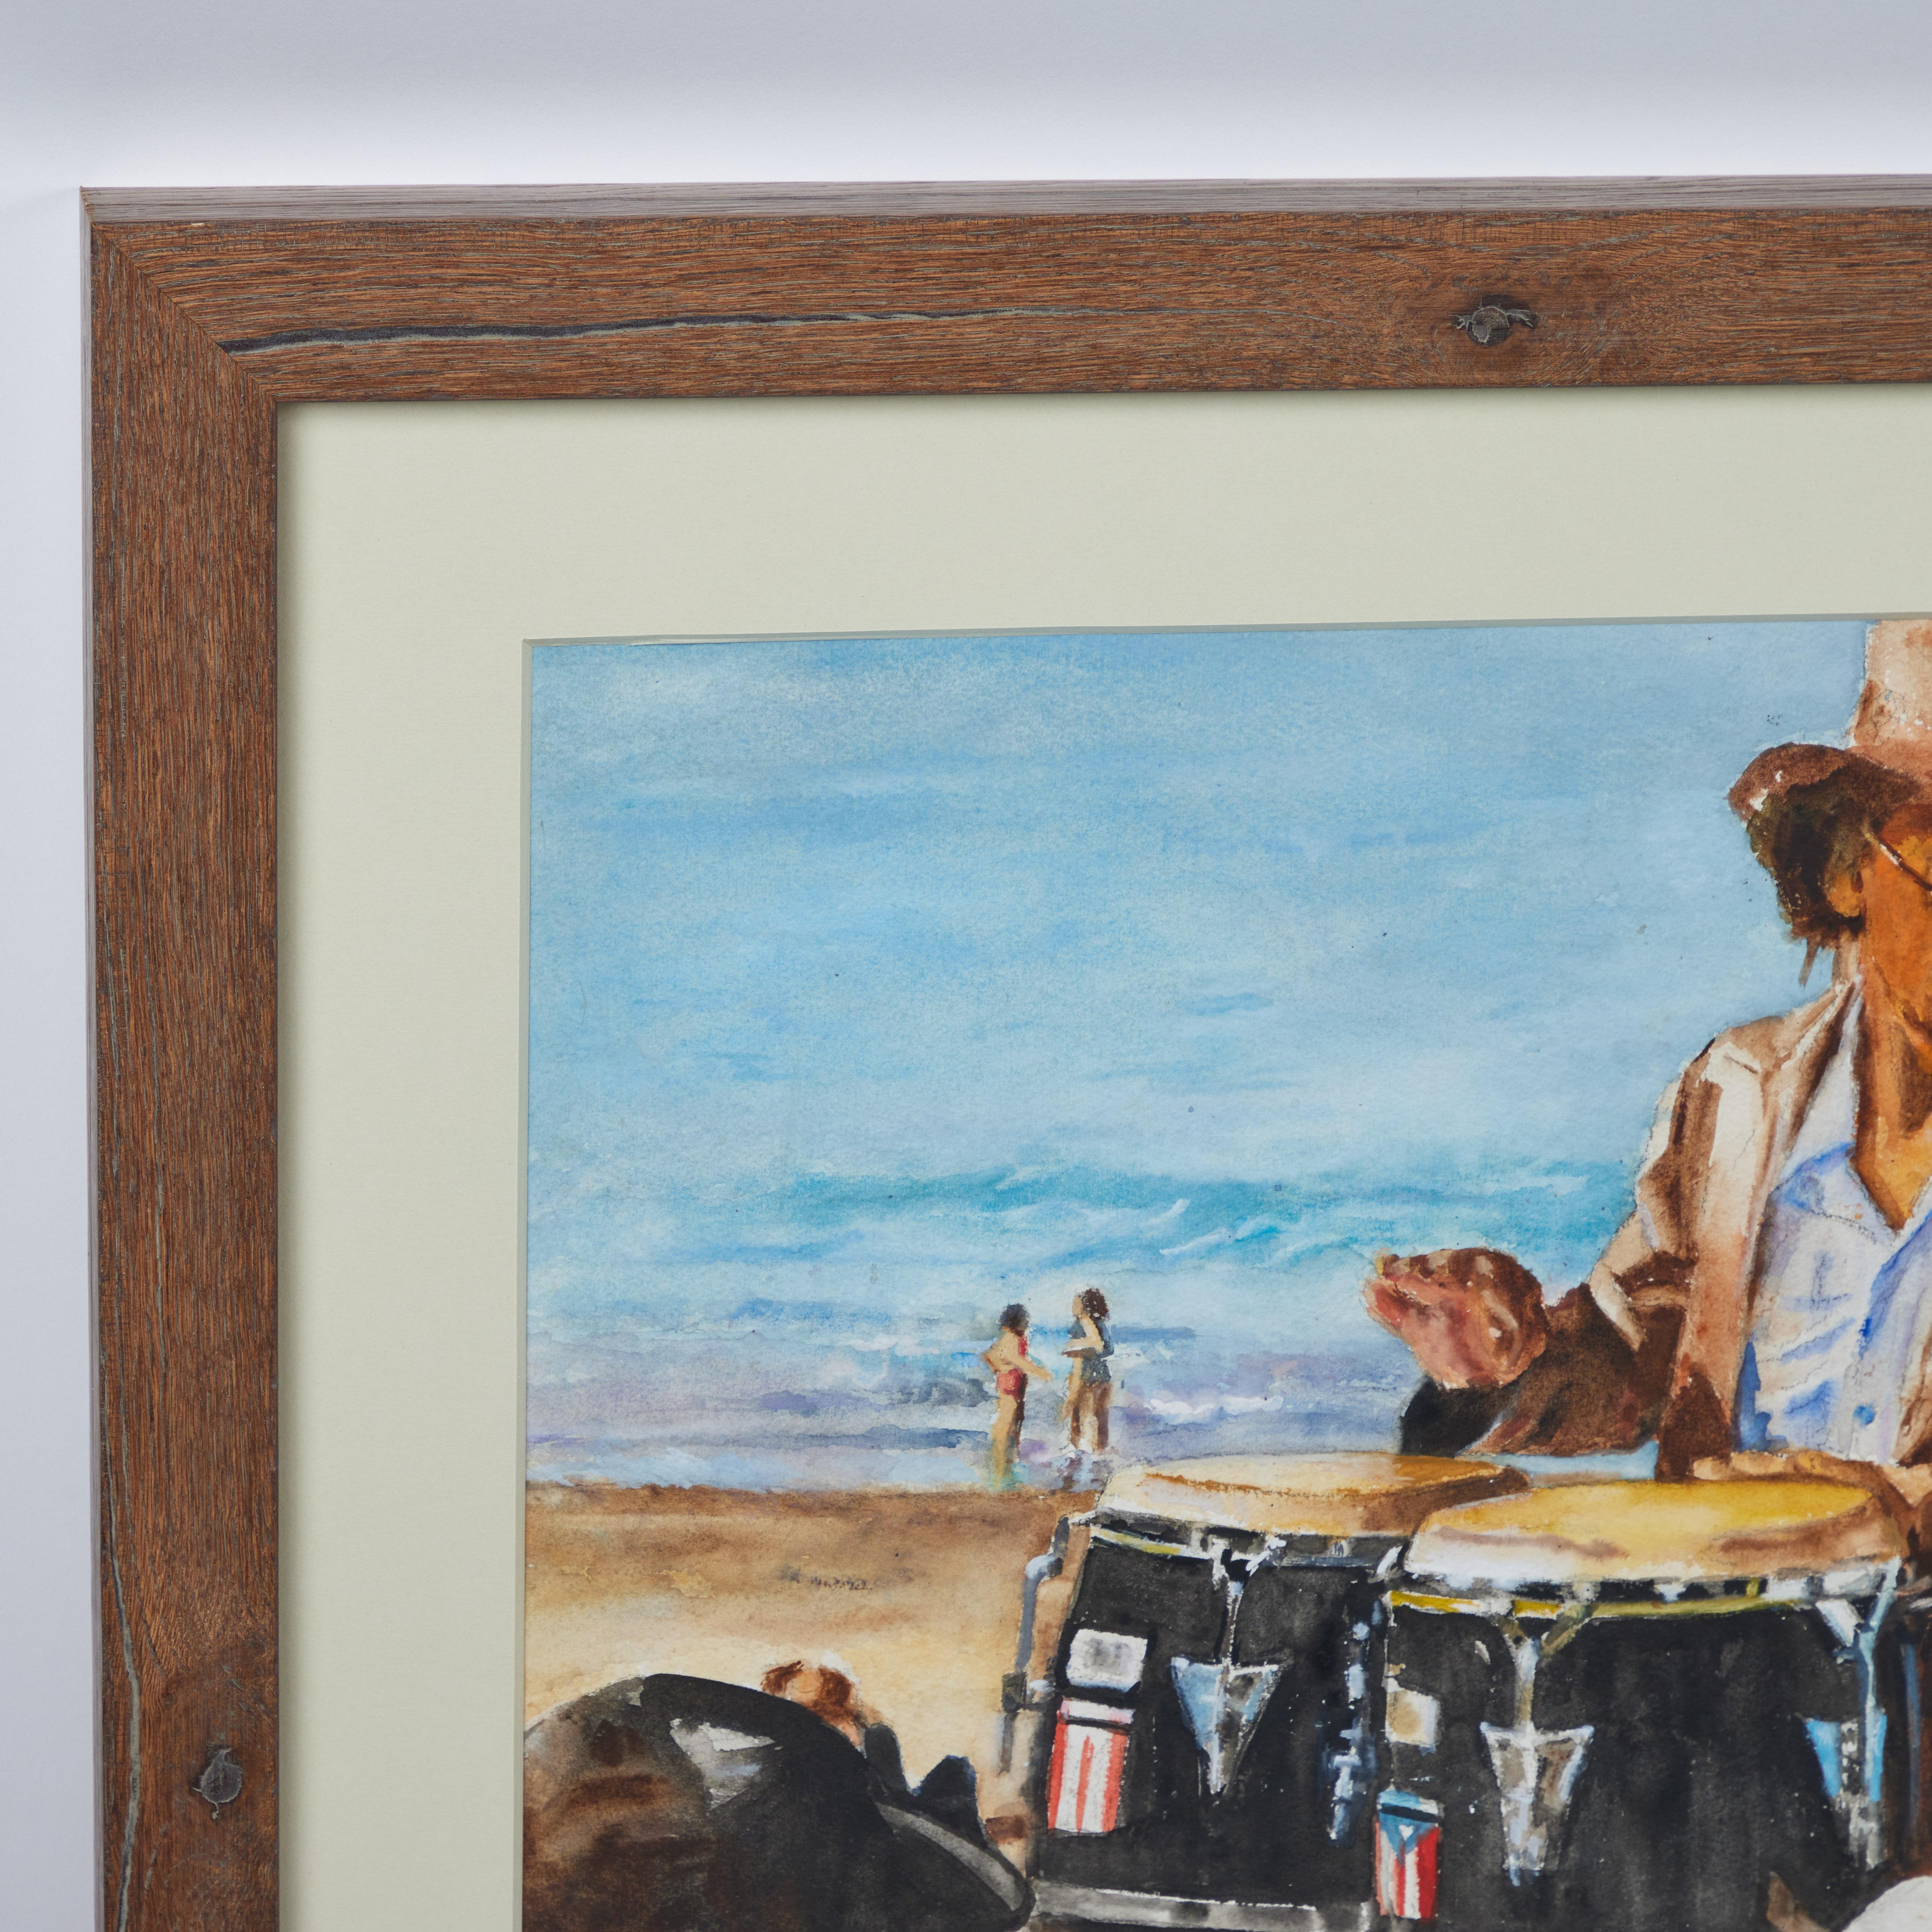 VIVACIOUS & VIBRANT

We are attracted to this cheerful original acrylic on paper rendering of a spirited musician and his followers on the boardwalk at the beach by artist Pat Berger (c 1970). It has been newly matted and framed in a handsome wood